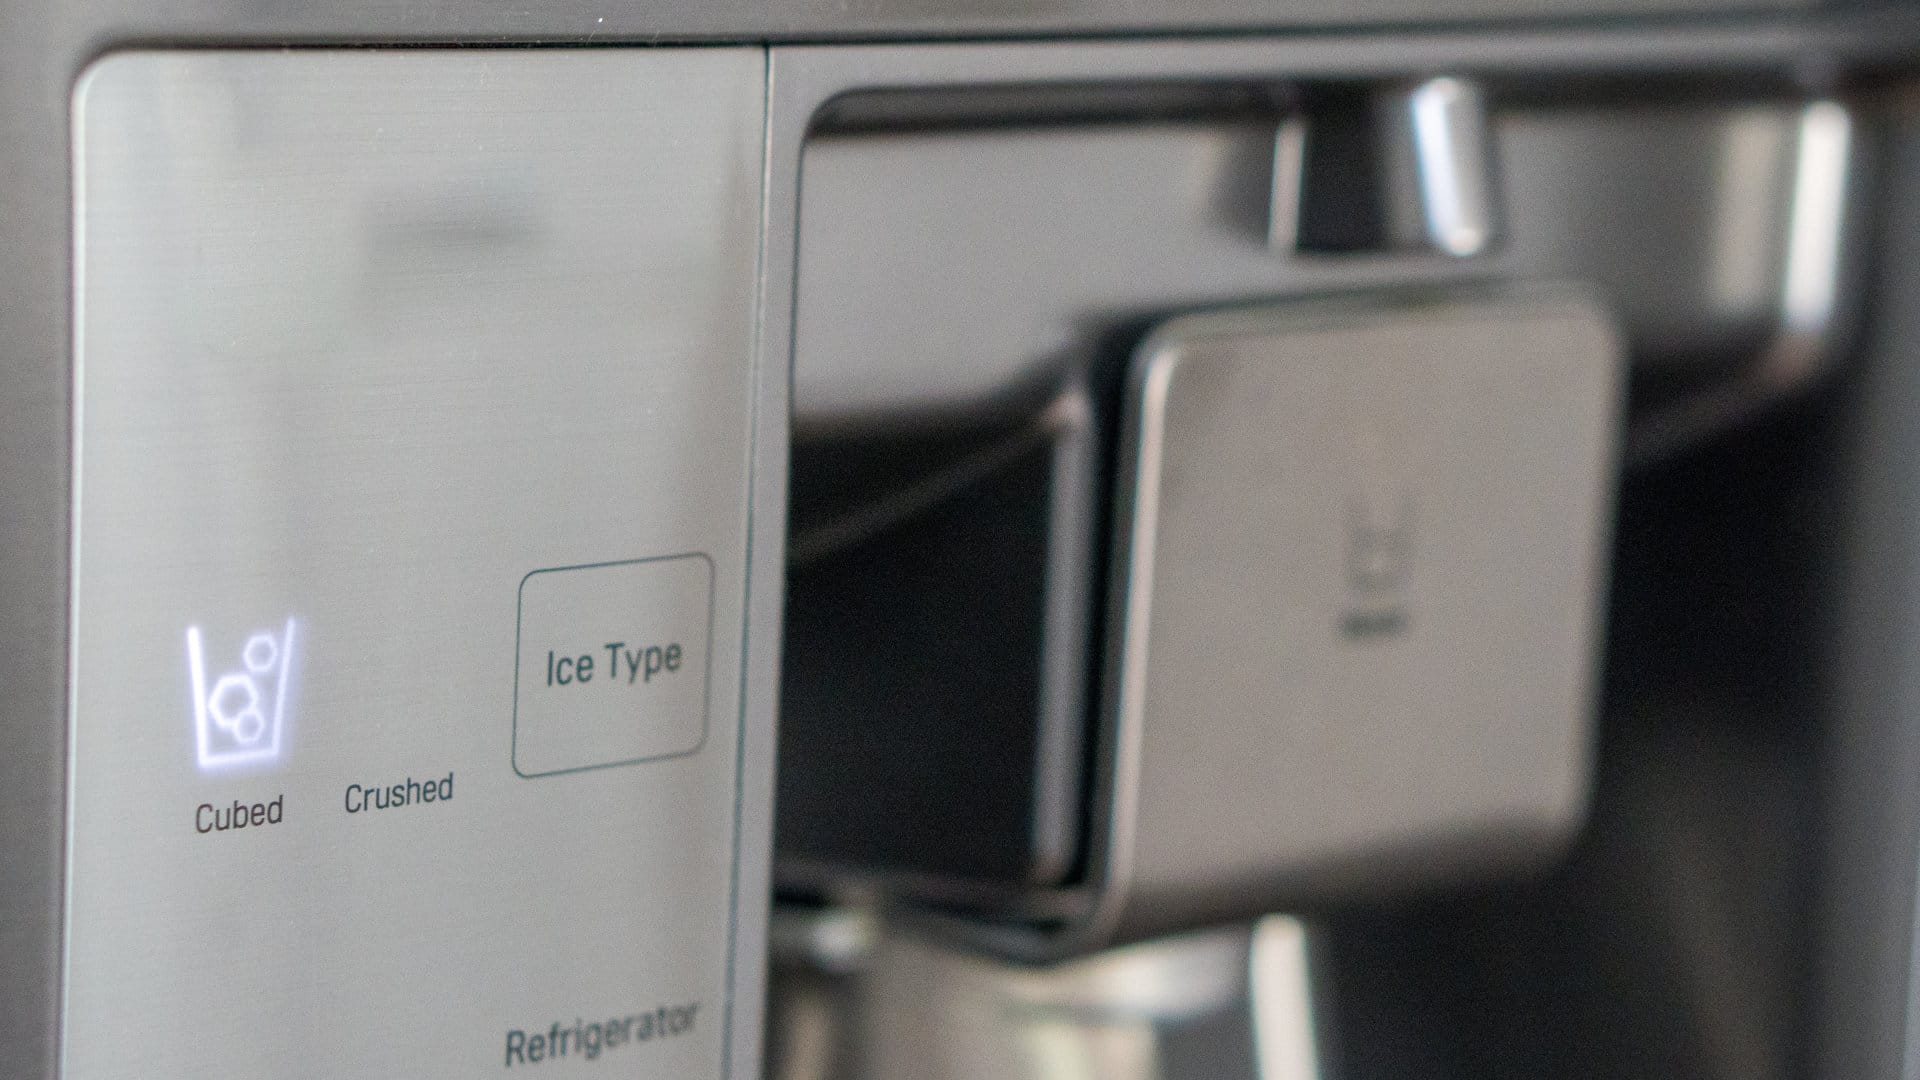 Featured image for “Samsung Ice Maker Issues? Here are 5 Fixes”